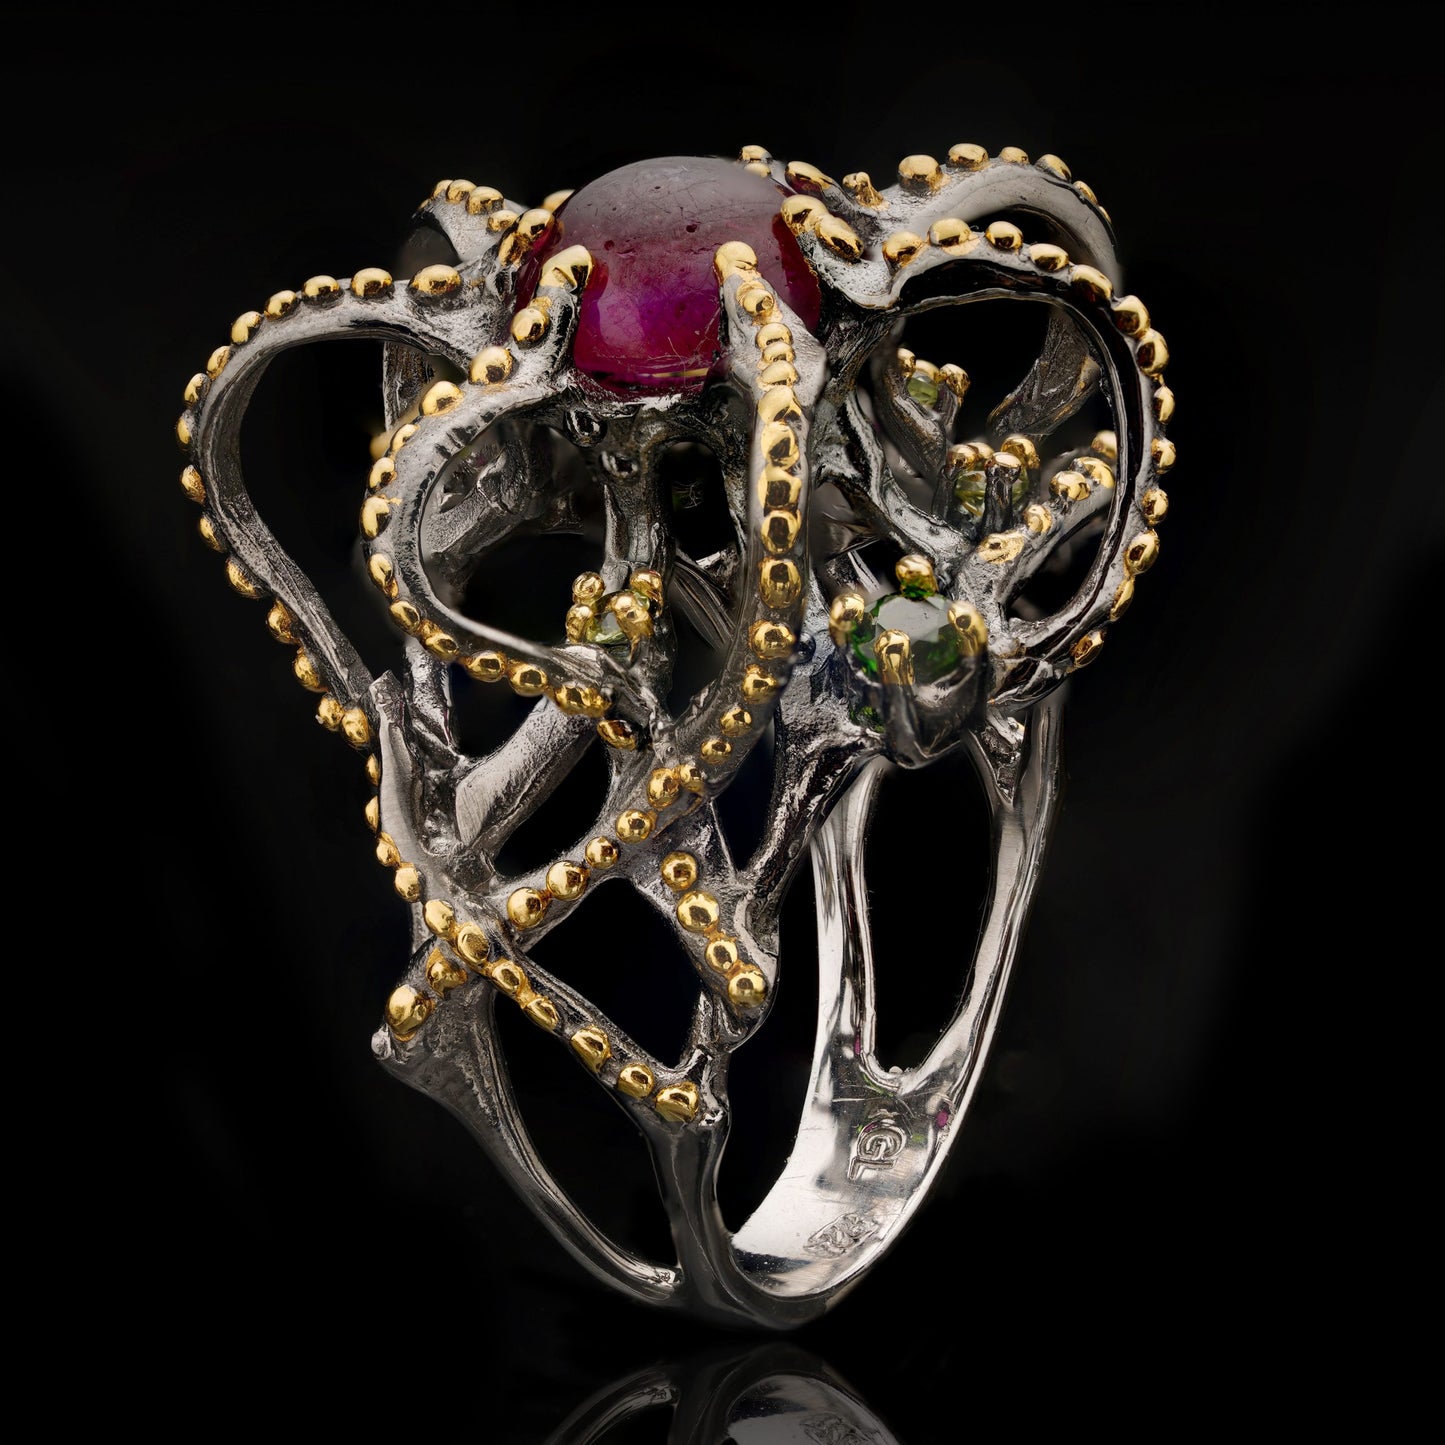 Ruby, Peridot, and Chrome Diopside Tentacle Ring